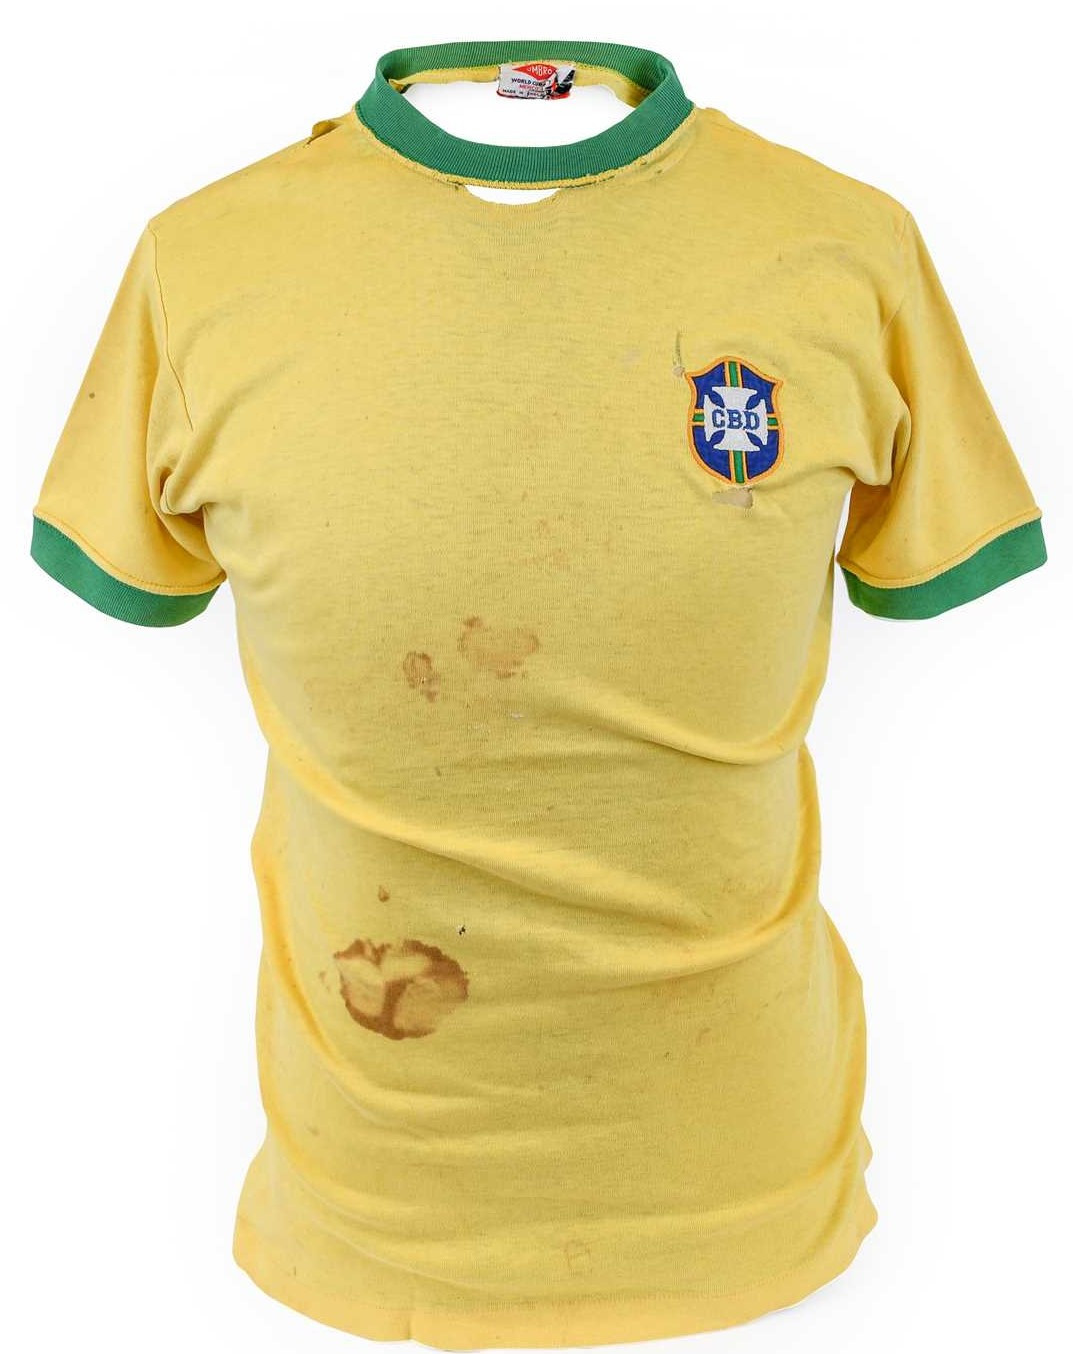 A shirt worn by Pelé during Brazil's match against England at the 1970 FIFA World Cup in Mexico was among other items auctioned ©Tennants Auctioneers